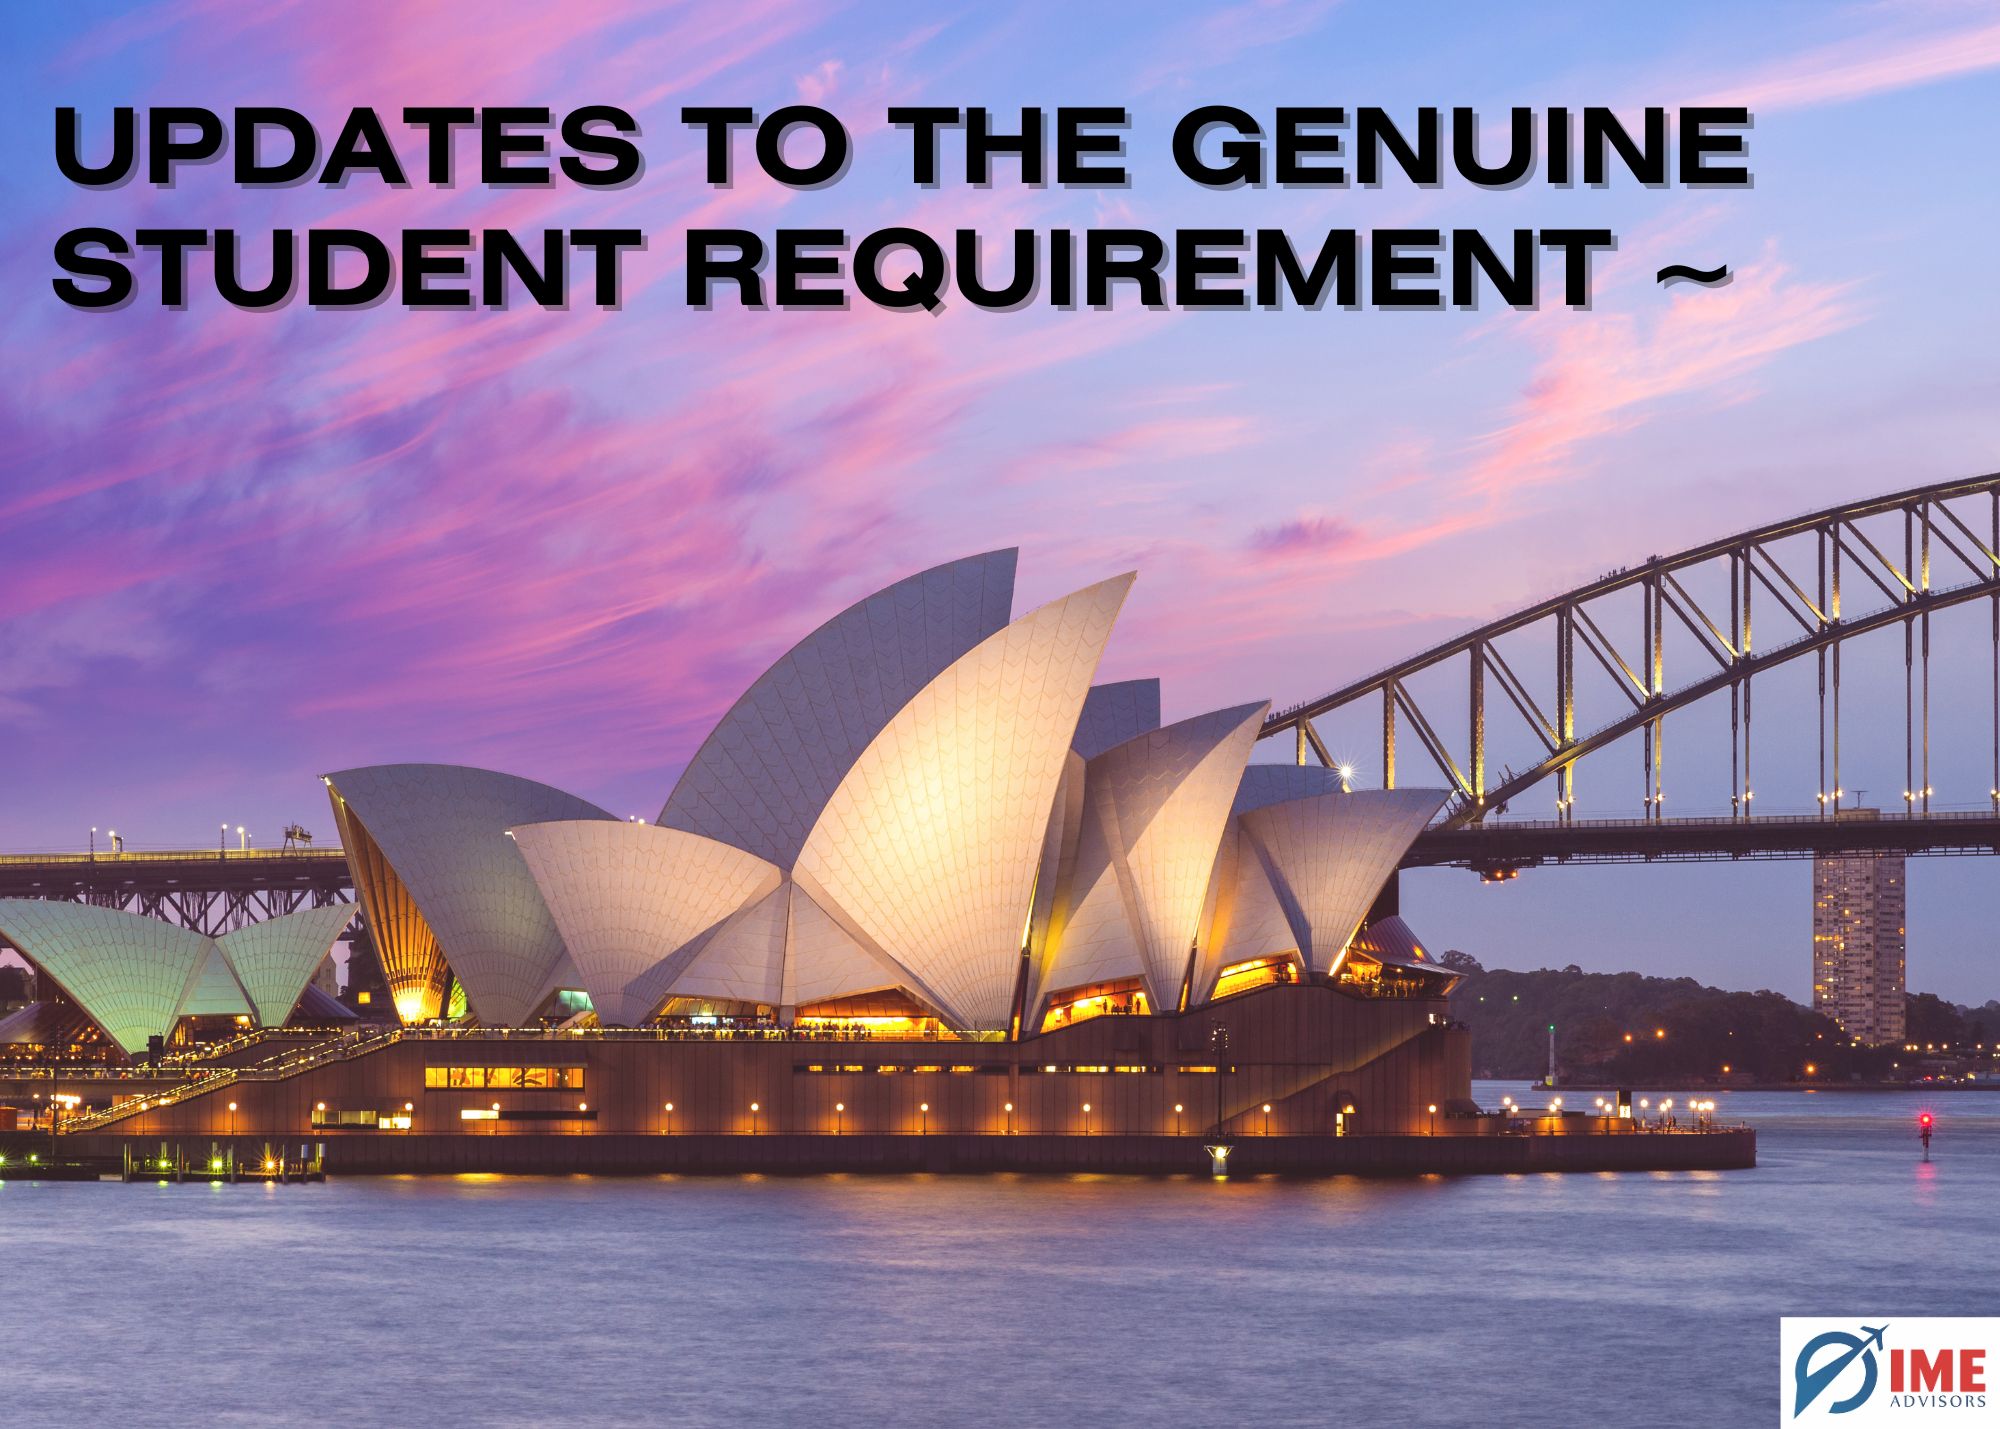 updates-to-the-genuine-student-requirement: